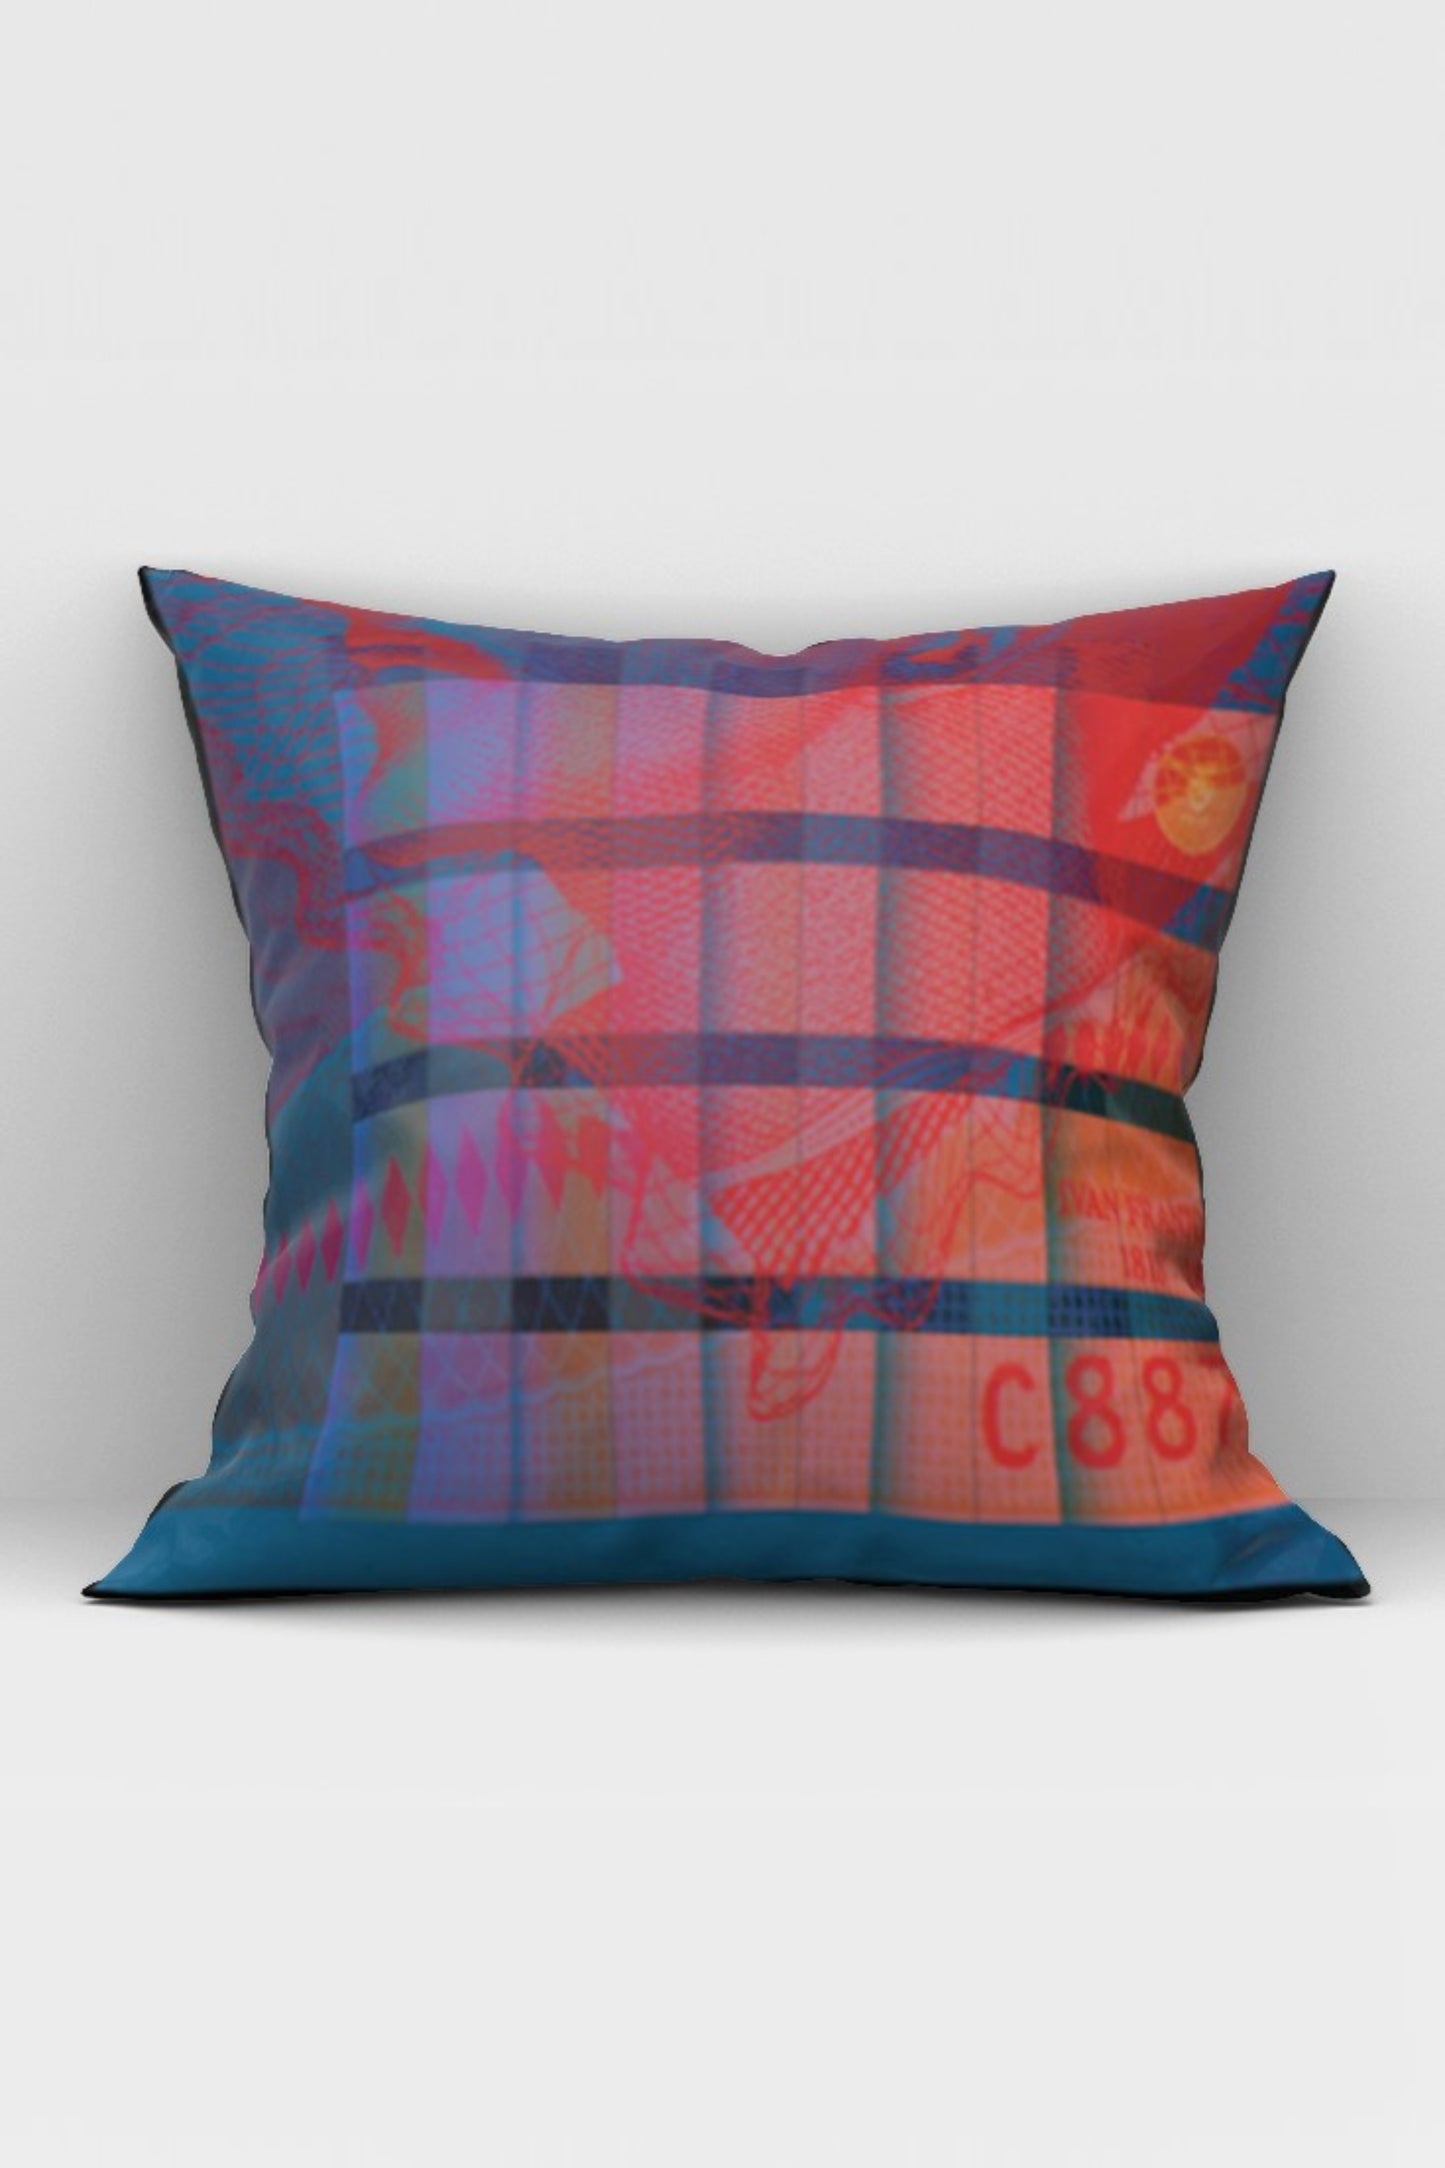 Bless My Funk Pillow - Red & blue.